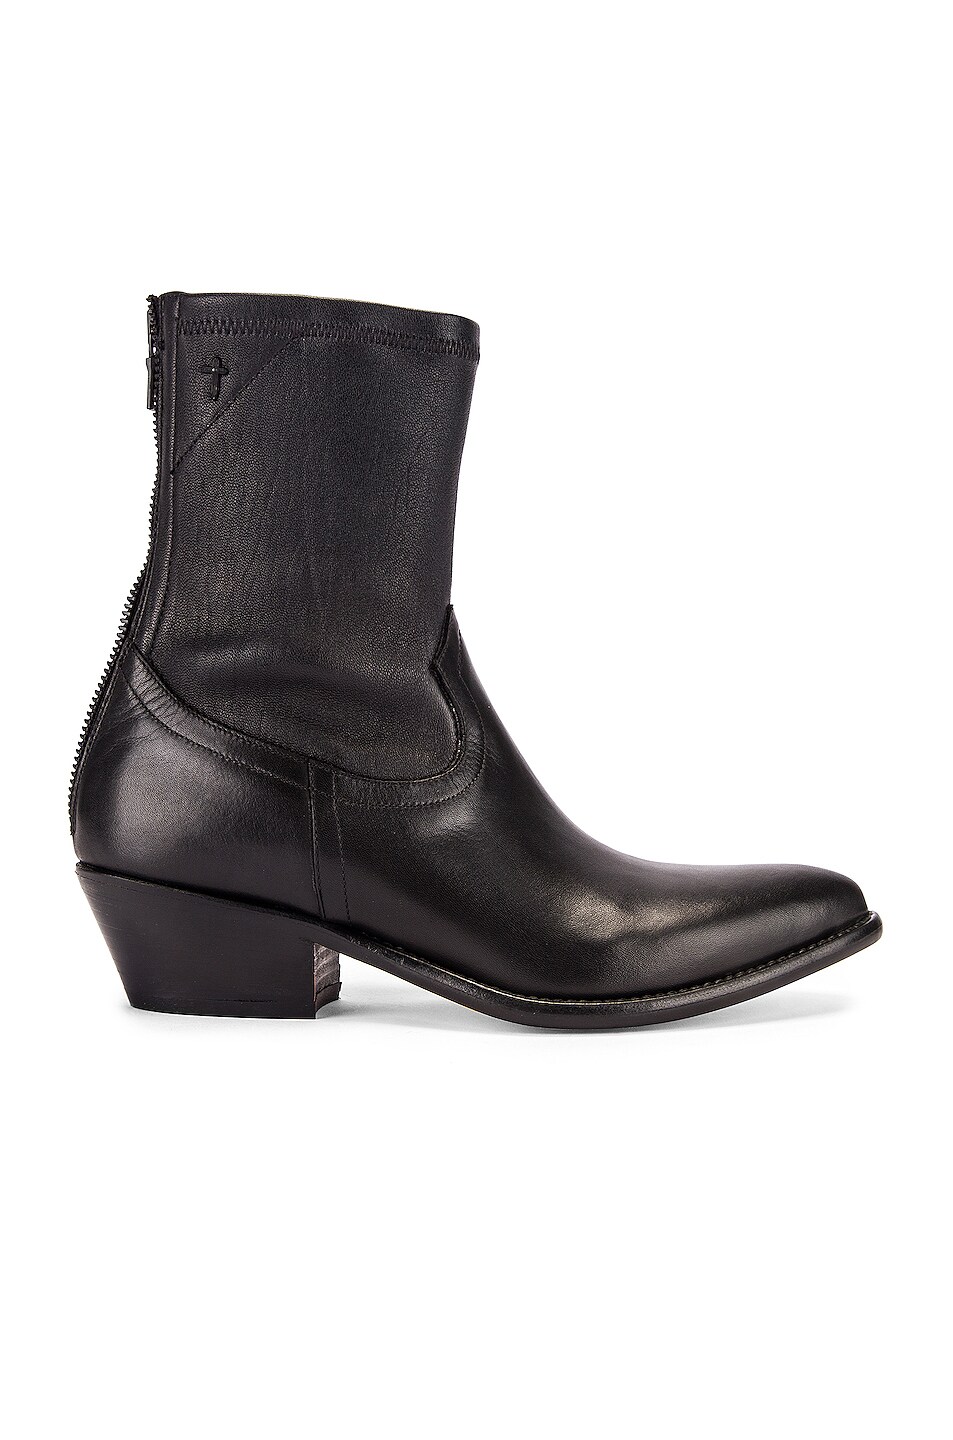 Image 1 of RTA Leather Boot in Black Leather